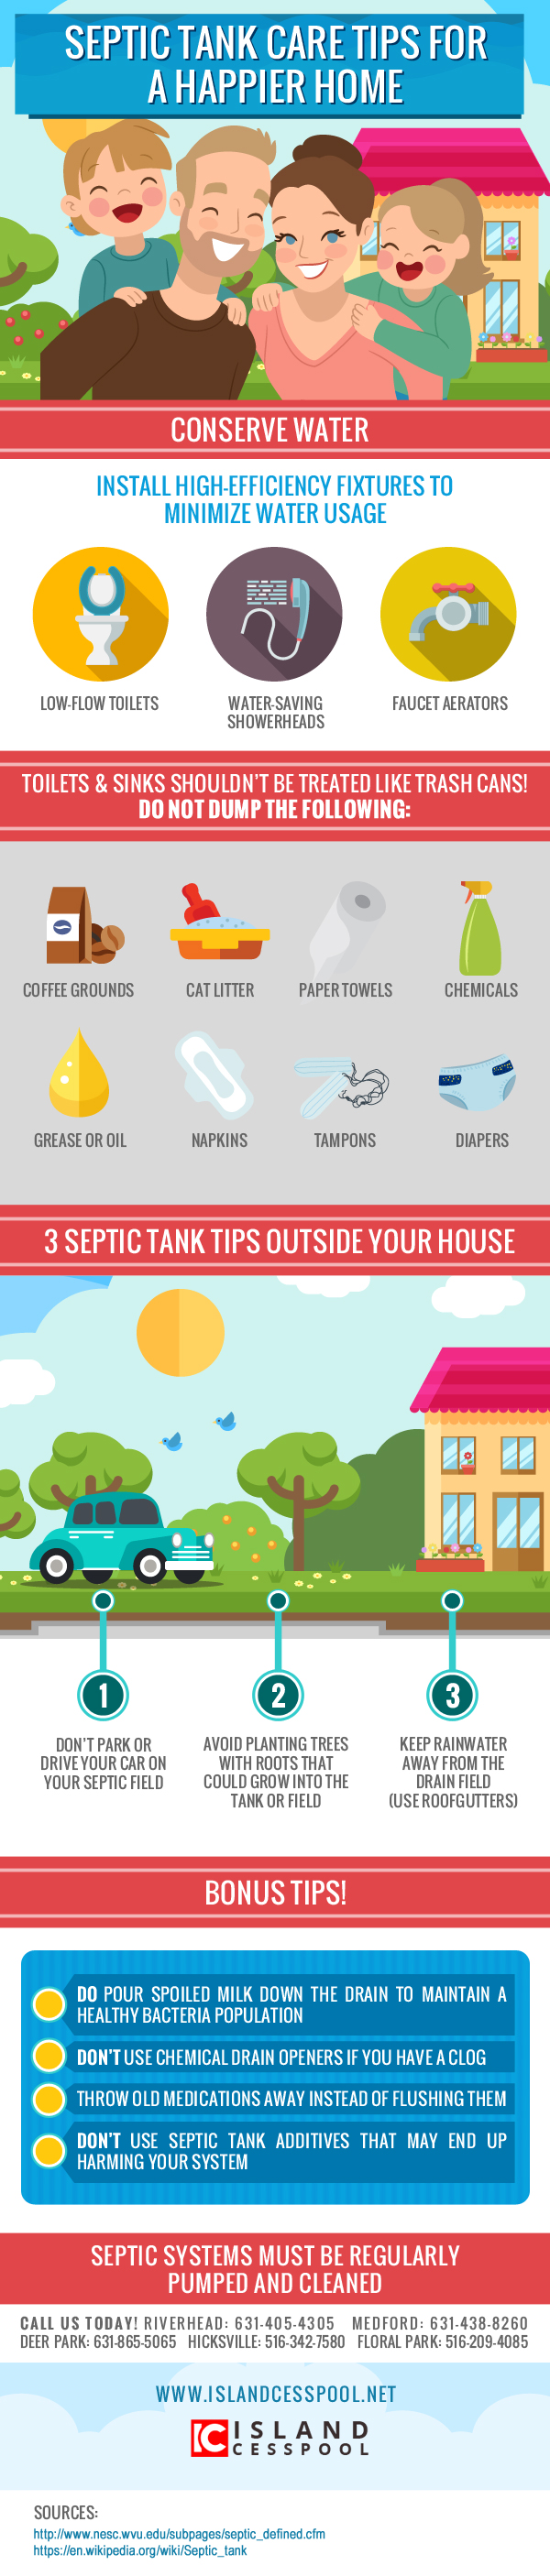 Septic Tank Care Tips